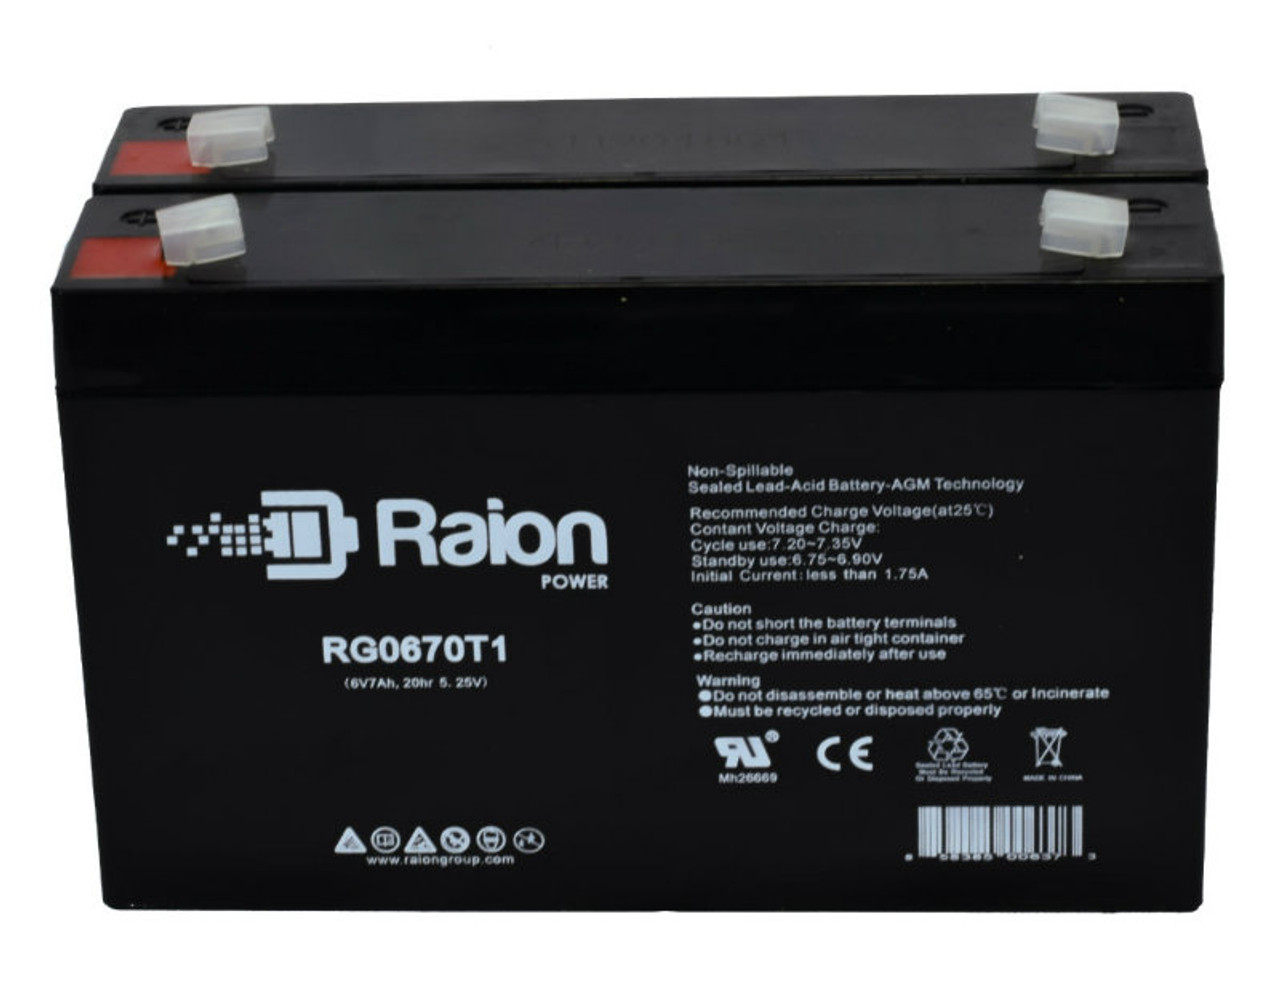 Raion Power RG0670T1 6V 7Ah Replacement Emergency Light Battery for Sure-Lites 3902 - 2 Pack